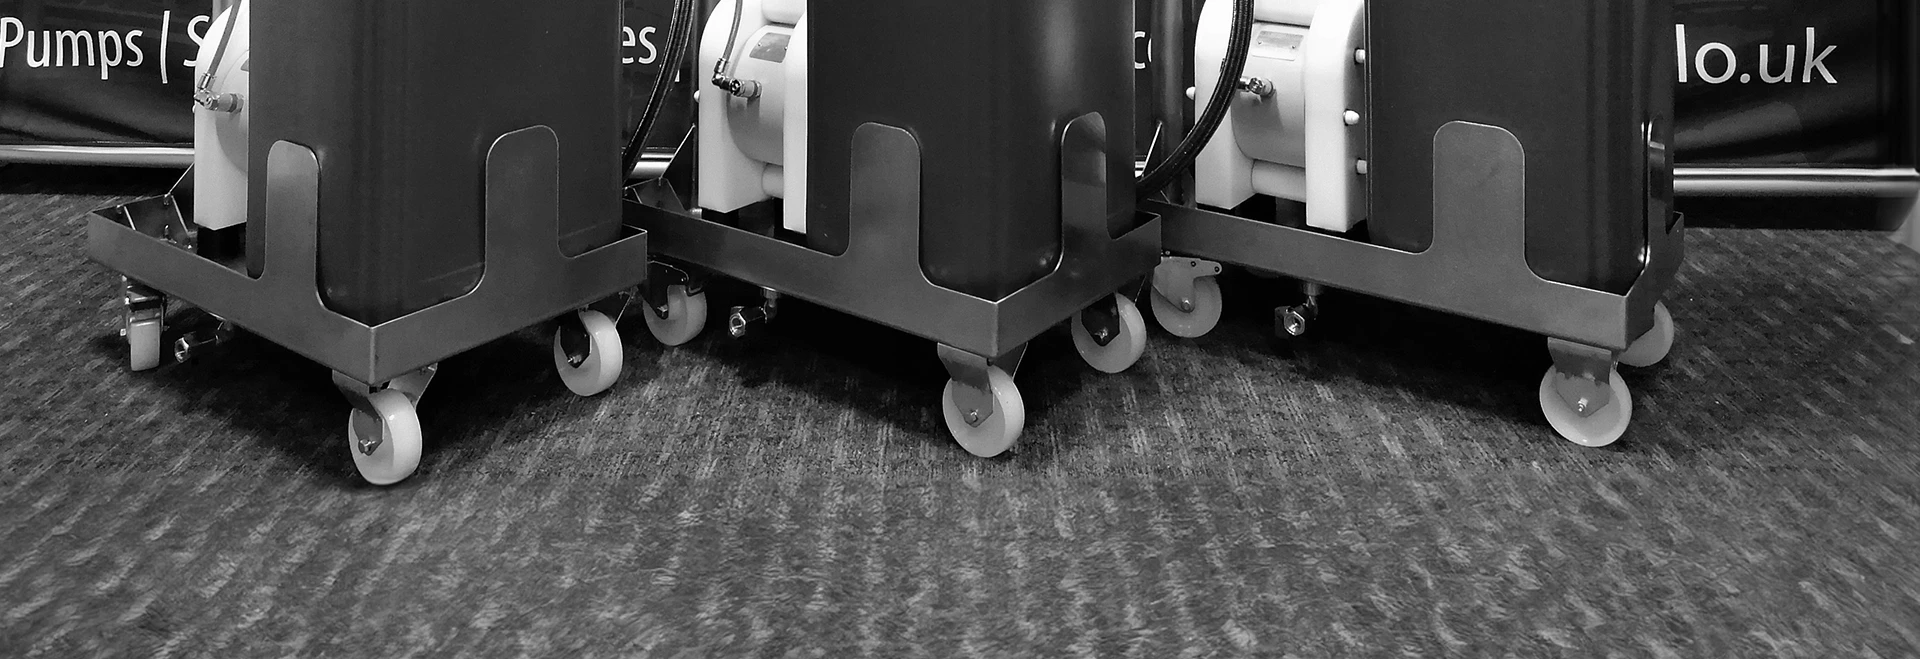 An image of 3 trollies with pumps mounted to them